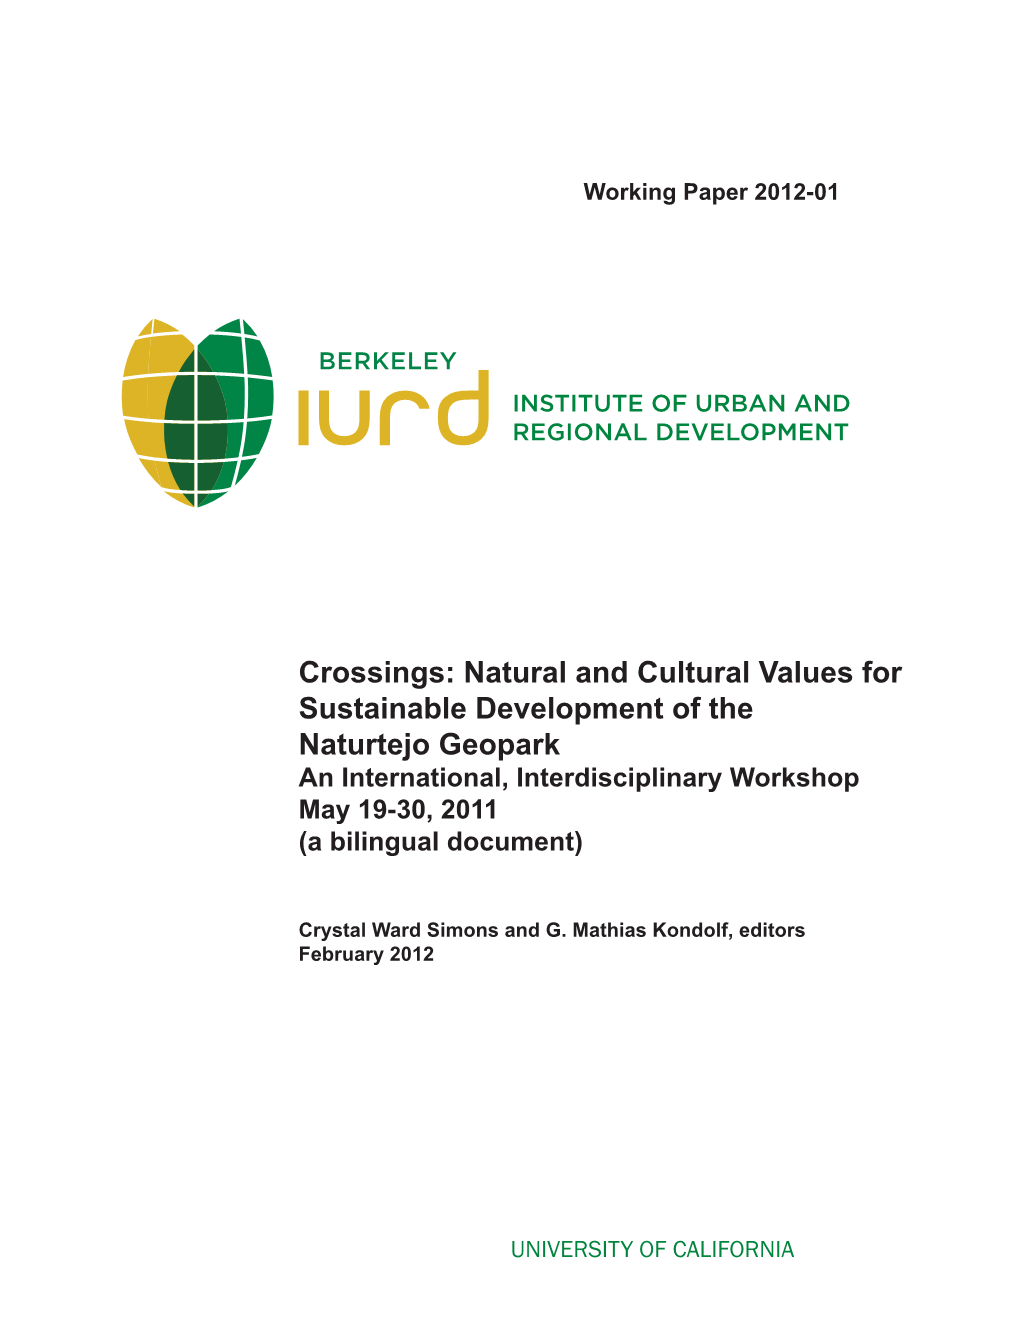 Crossings: Natural and Cultural Values for Sustainable